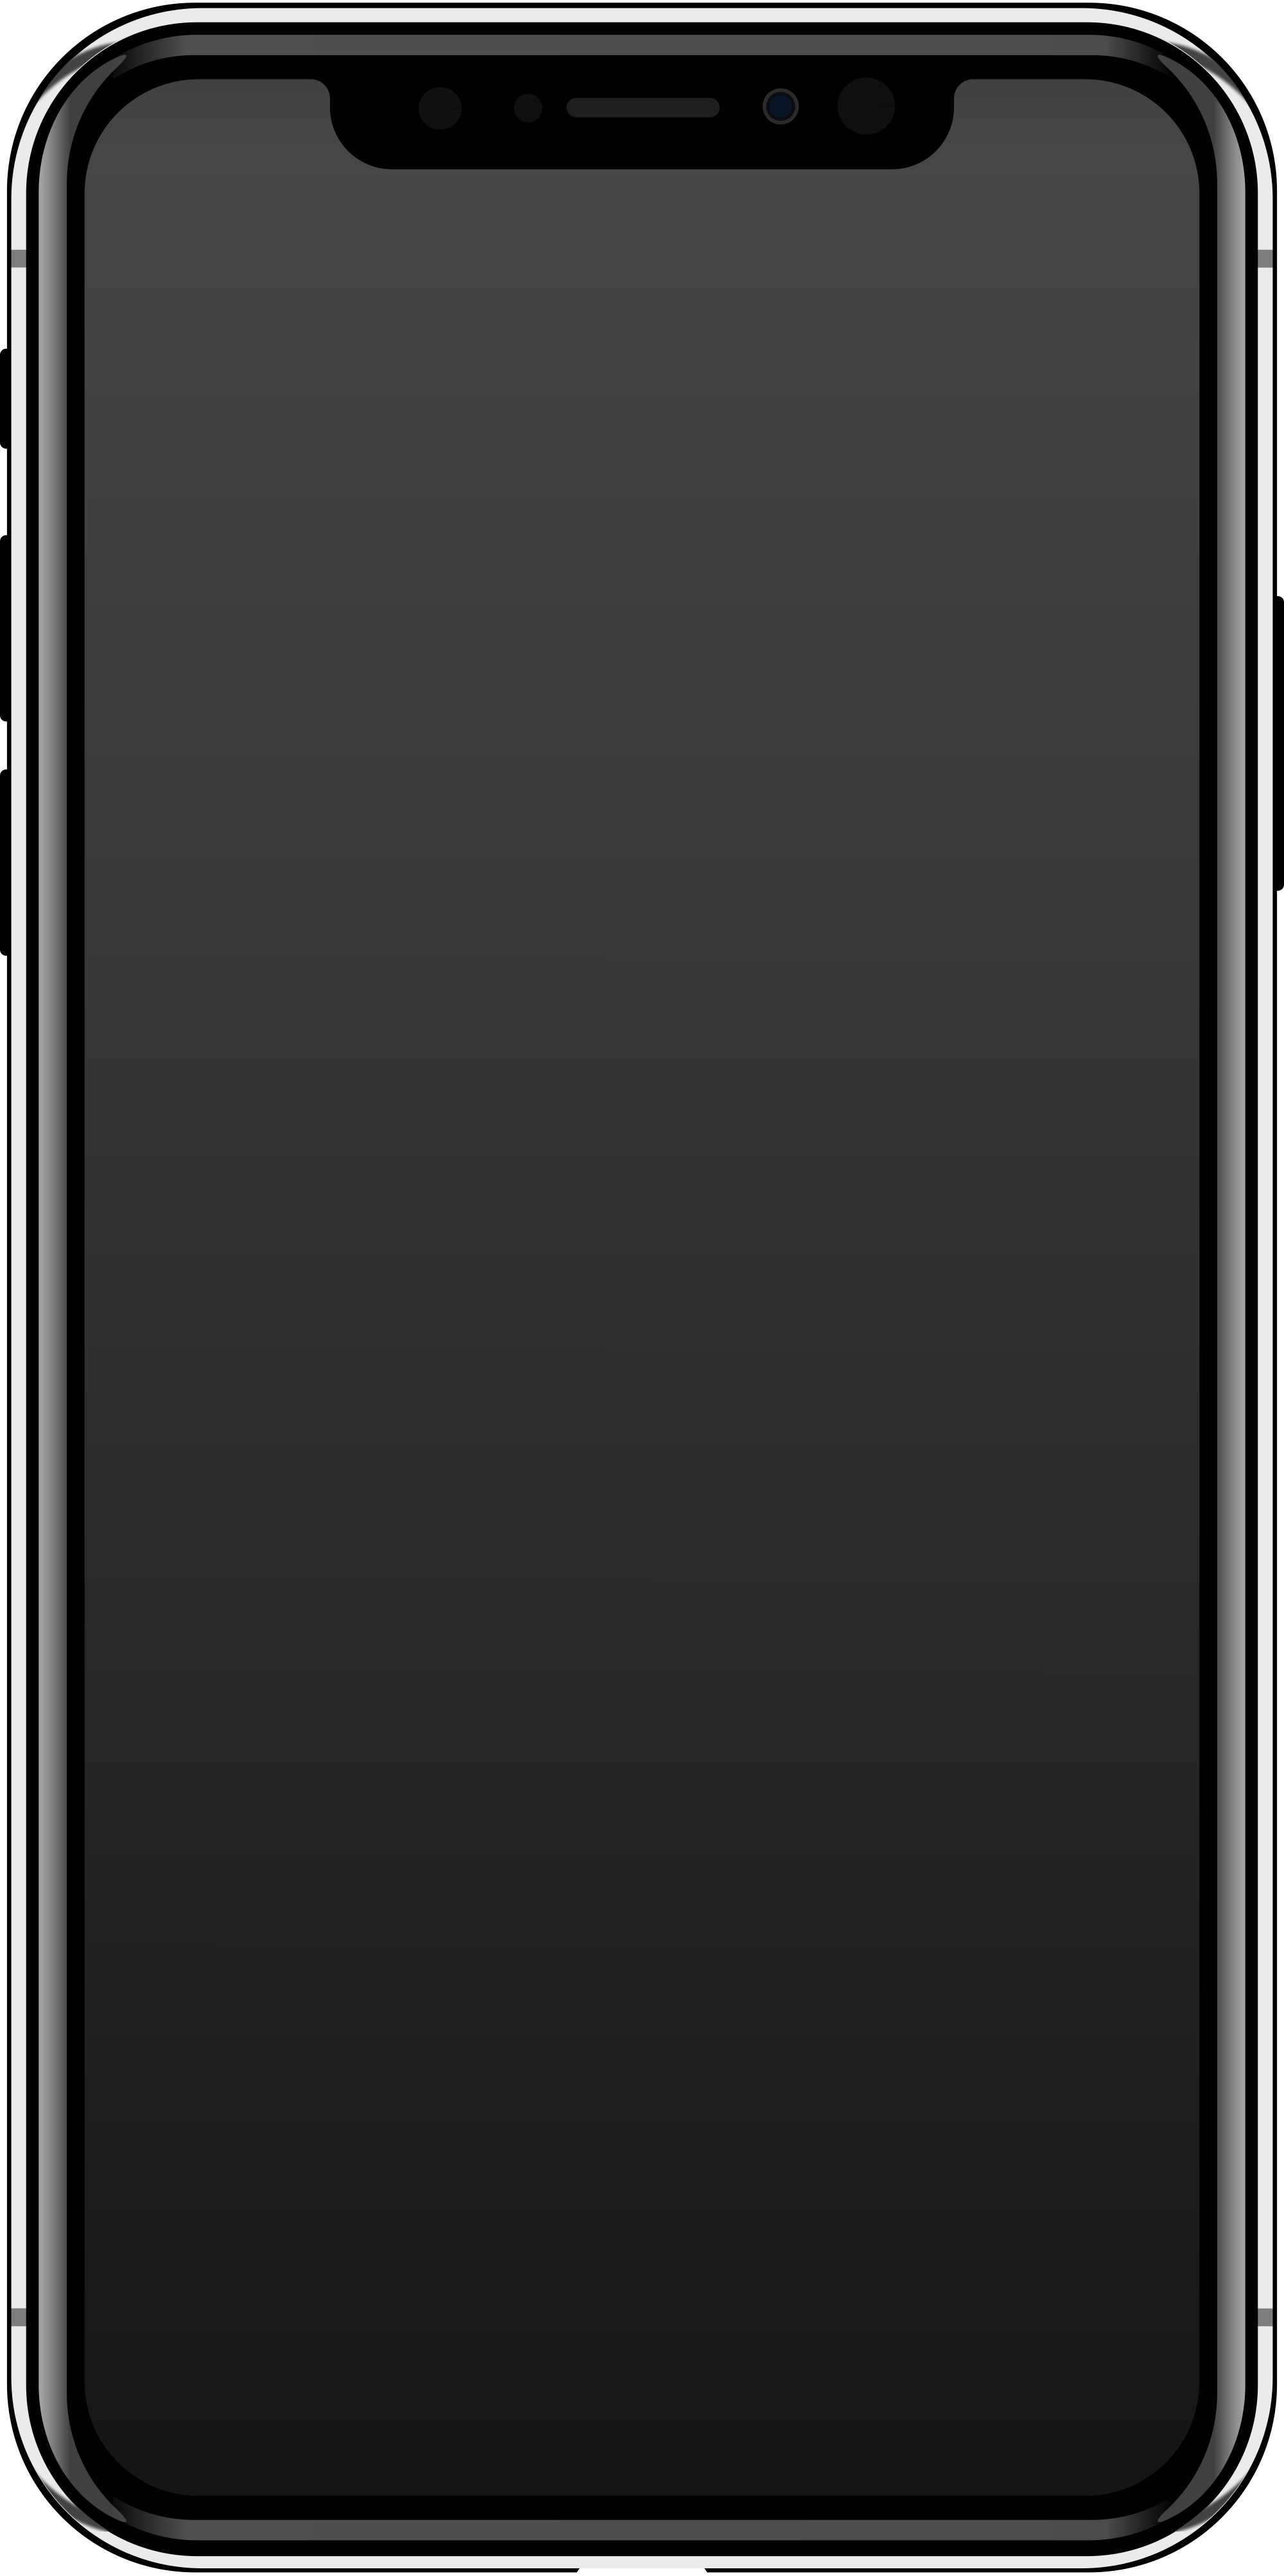 Are there any specific steps to follow to fix the iPhone X black screen?
Is there a possibility that the iPhone X black screen issue is hardware-related?